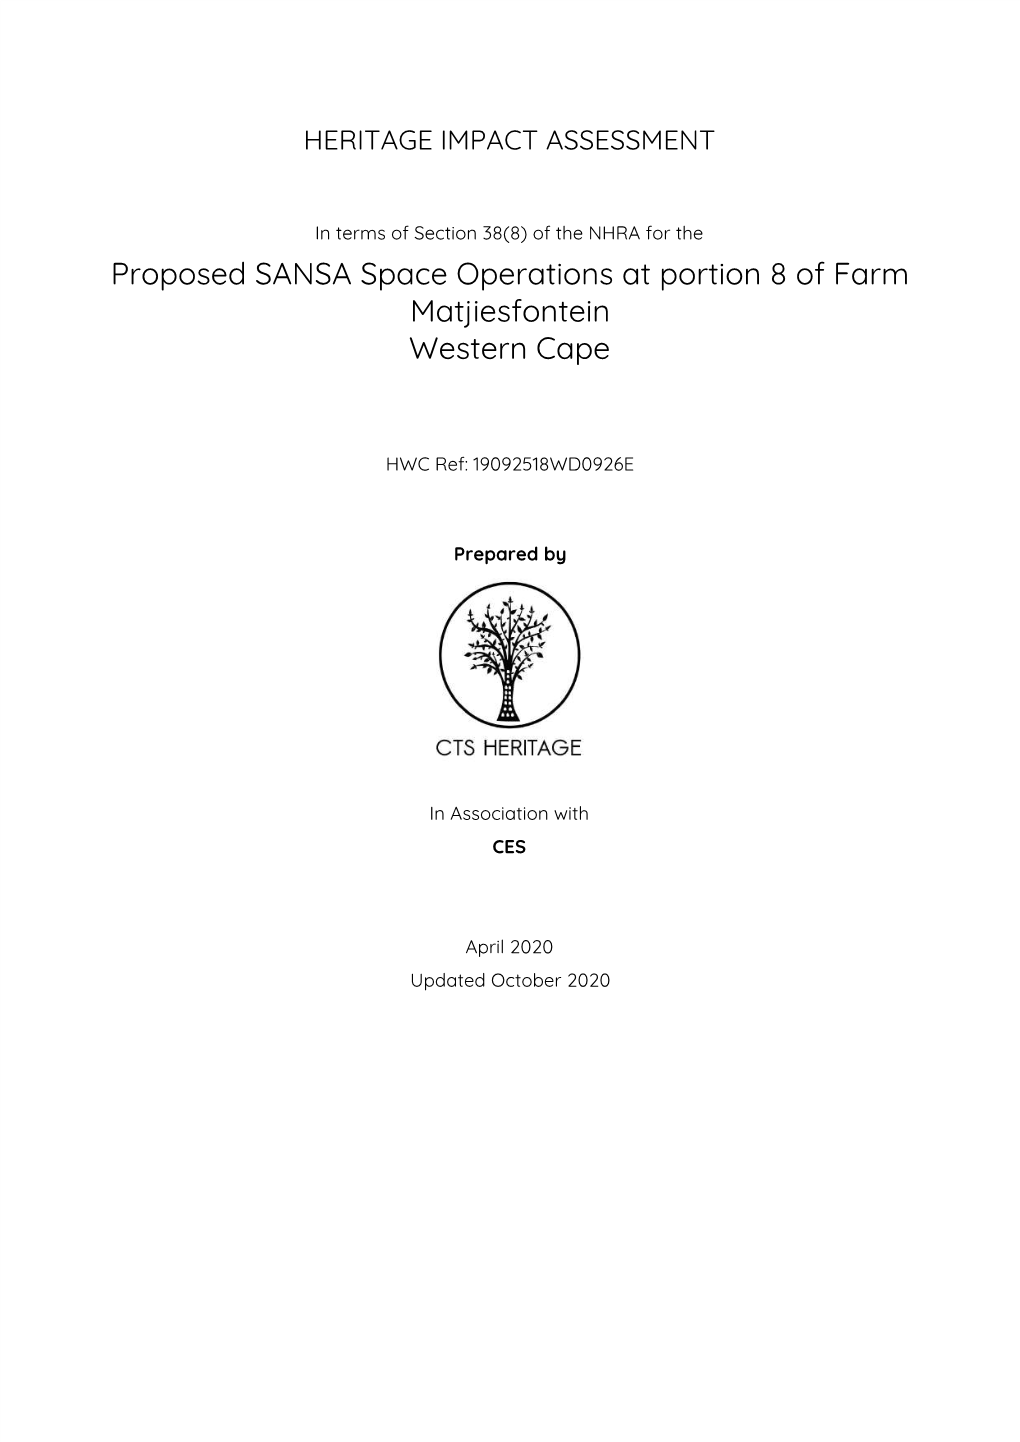 Proposed SANSA Space Operations at Portion 8 of Farm Matjiesfontein Western Cape